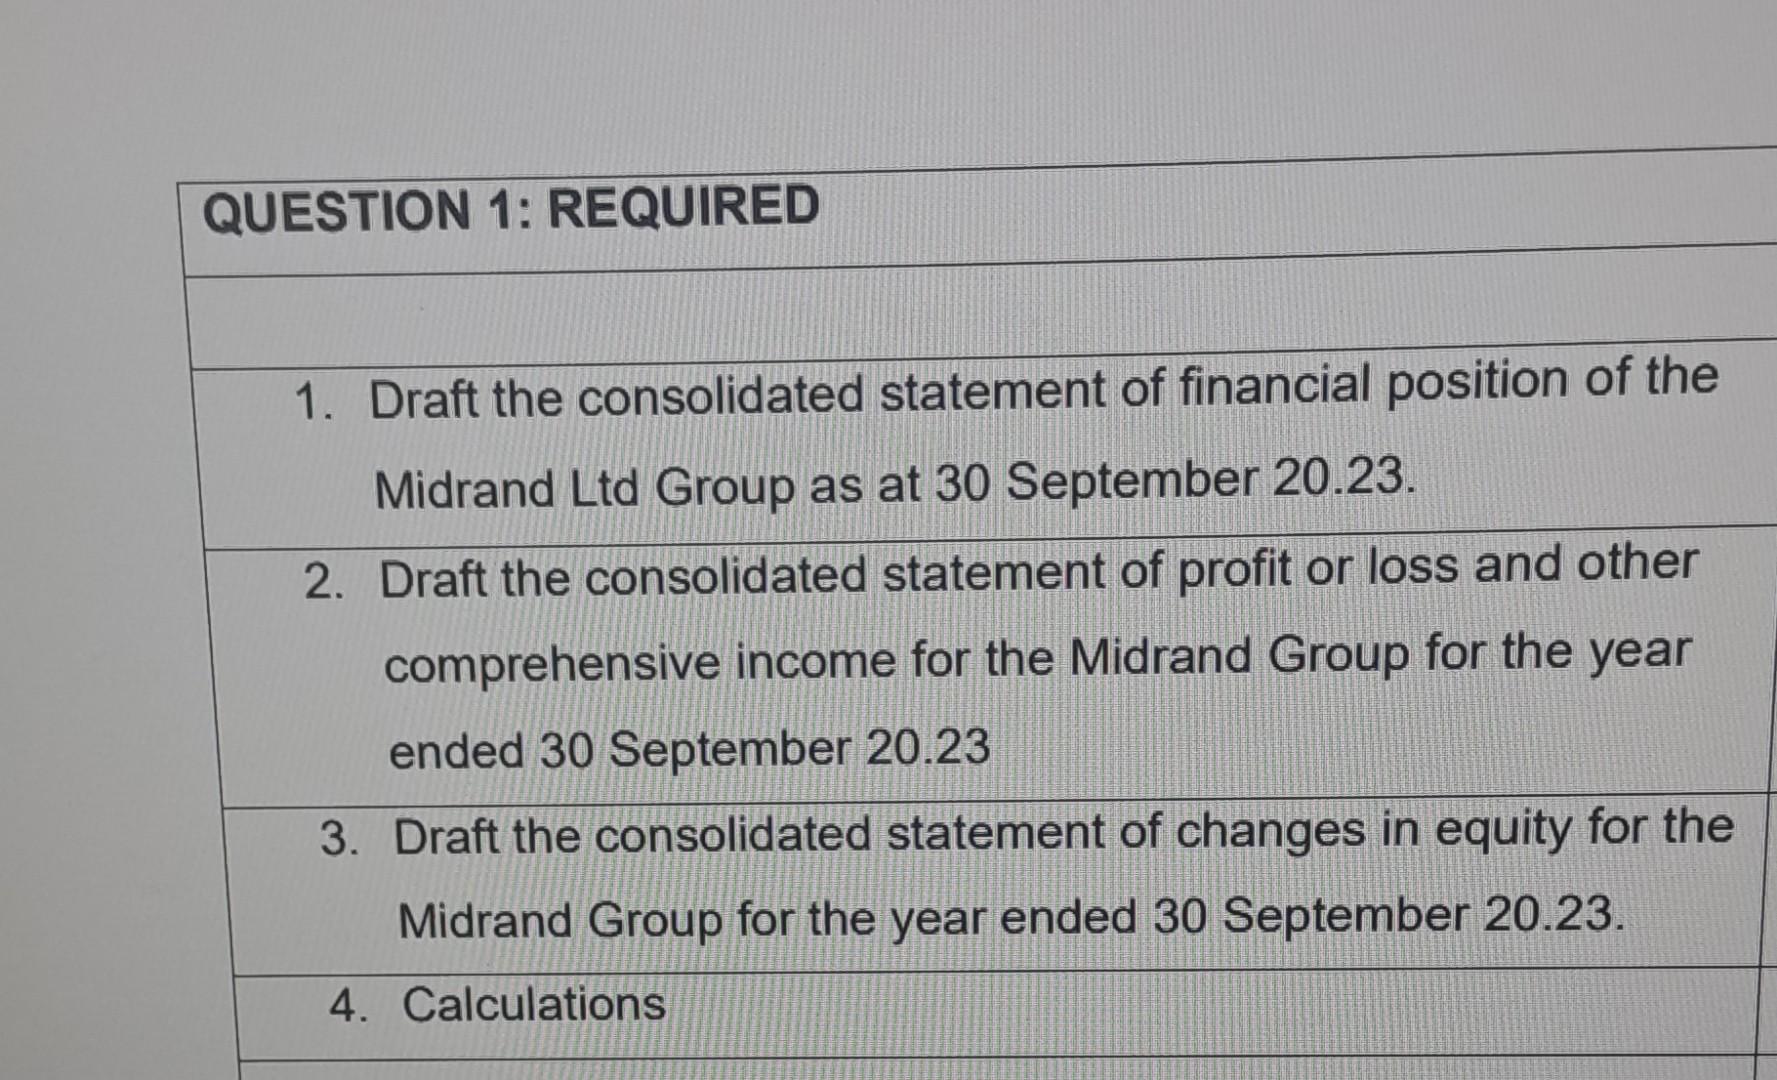 QUESTION 1: REQUIRED 1. Draft the consolidated statement of financial position of the Midrand Ltd Group as at